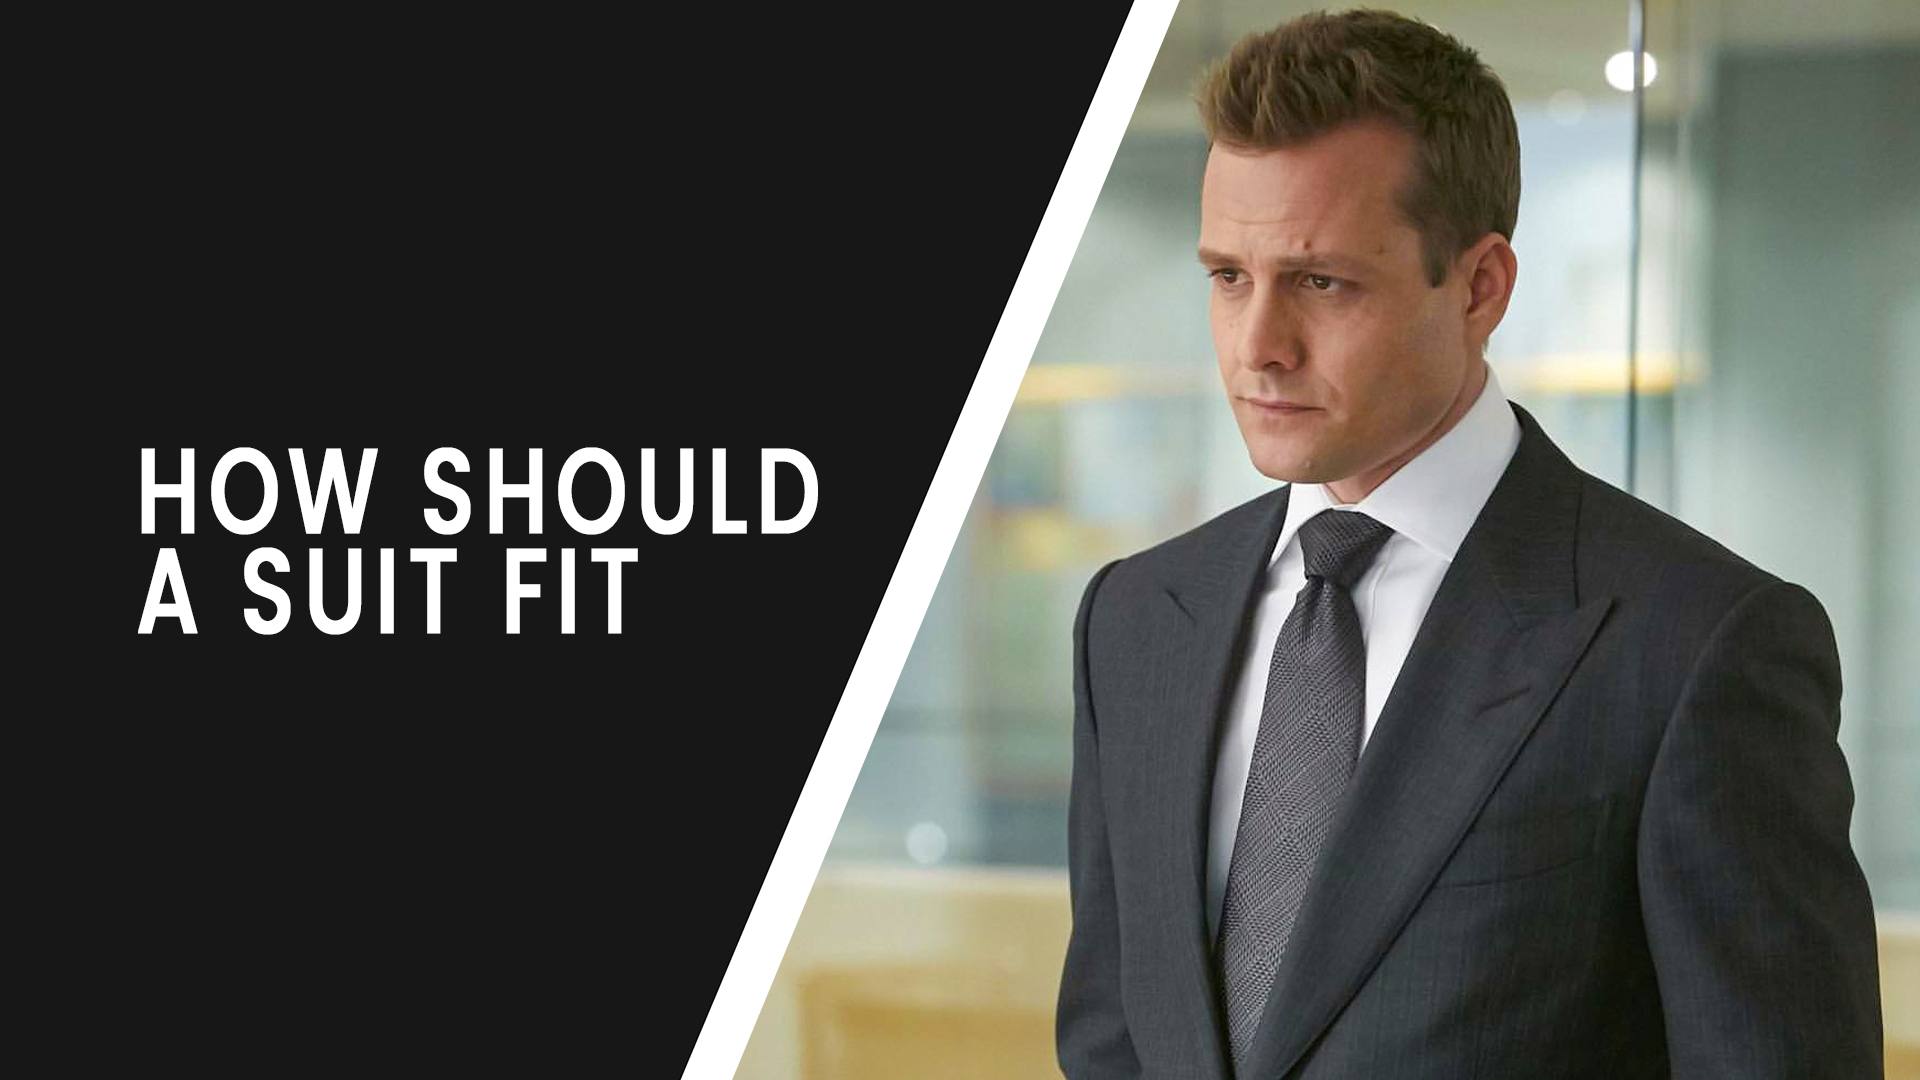 How Should a Suit Fit: Guide to a Perfect Fitting Suit - Abitieri